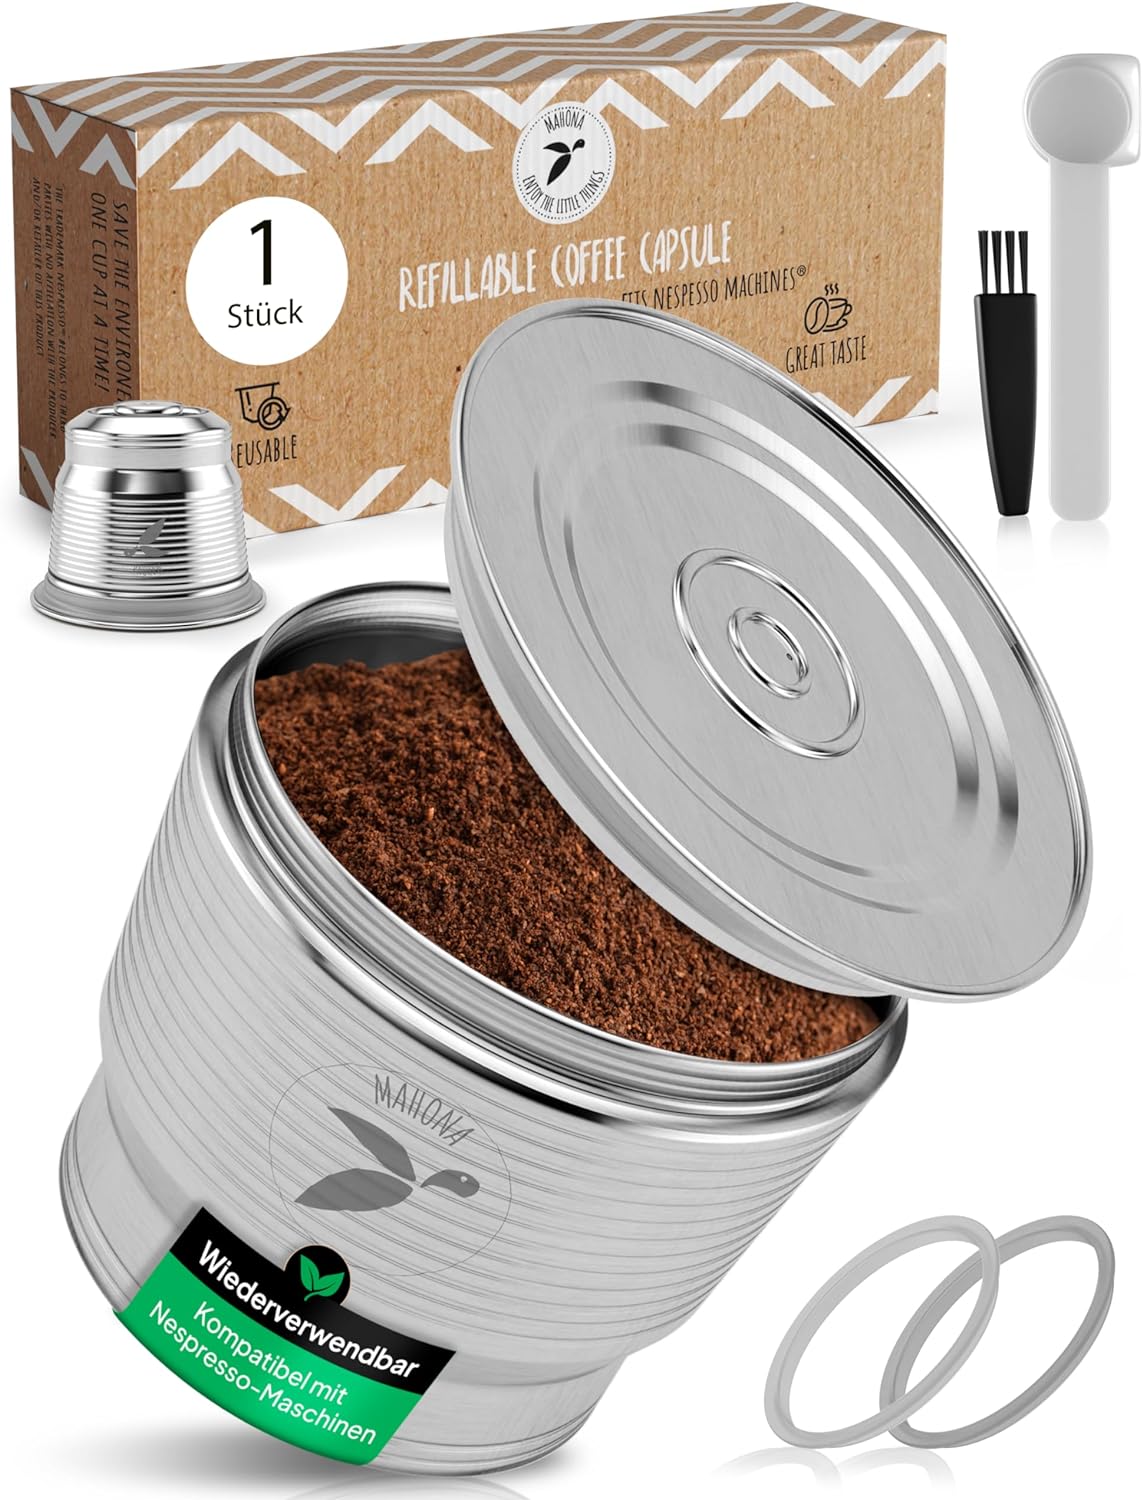 Refillable Stainless Steel Coffee Capsule for Refilling, Reusable Refill Capsule for Environmentally Conscious Coffee Lovers, Compatible with Nespresso Machines + Capsule Holder mahona